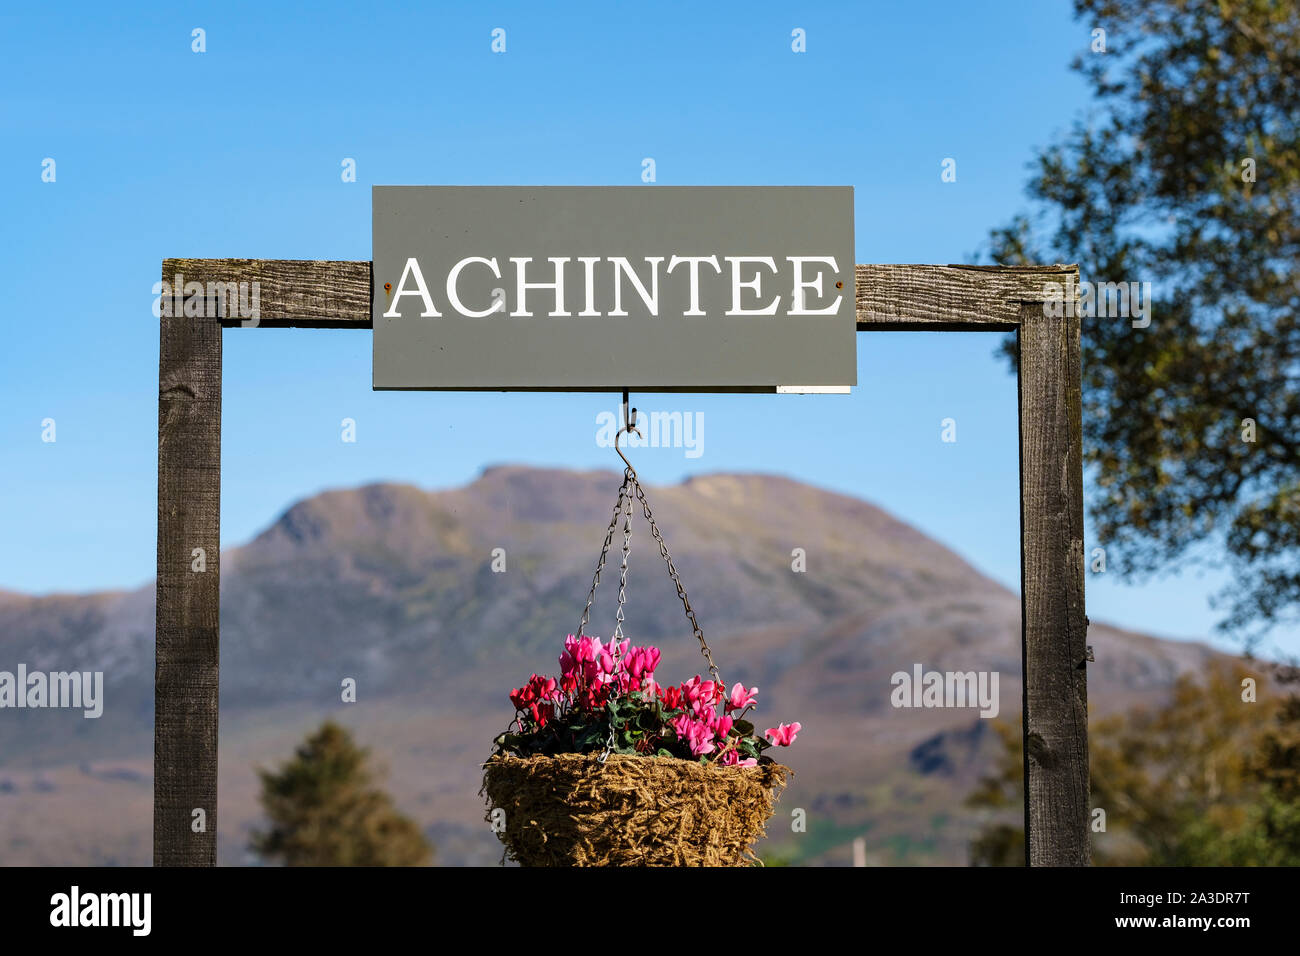 Hamlet place name with hanging basket on A890 Achintee, Strathcarron, Wester Ross, North West Highlands of Scotland Stock Photo